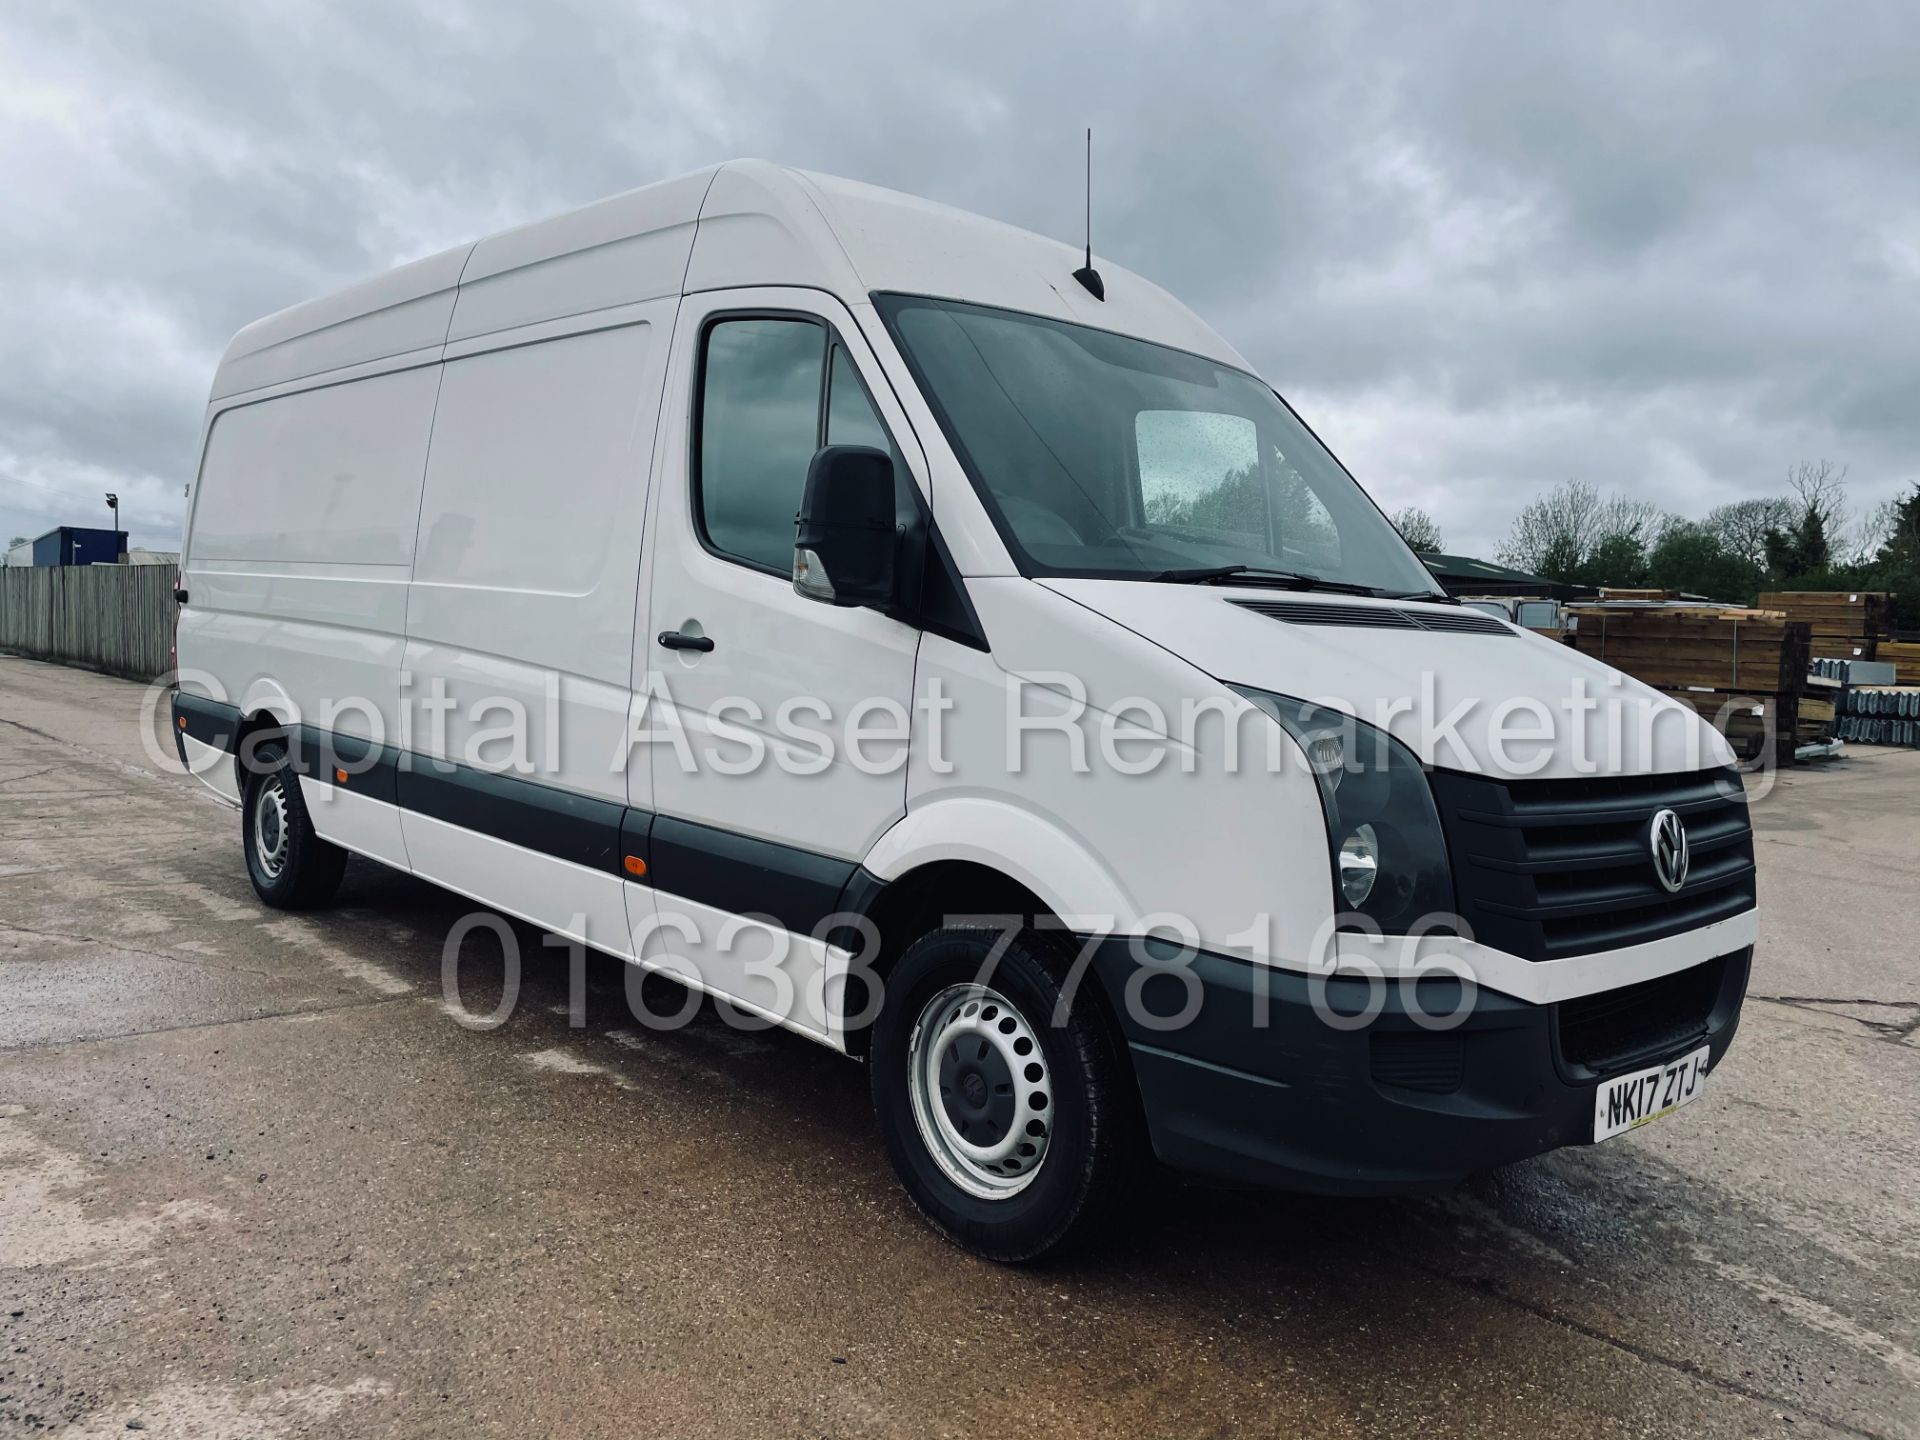 (On Sale) VOLKSWAGEN CRAFTER *LWB HI-ROOF* (2017 - EURO 6) '2.0 TDI BMT - 6 SPEED' *CRUISE CONTROL* - Image 3 of 39